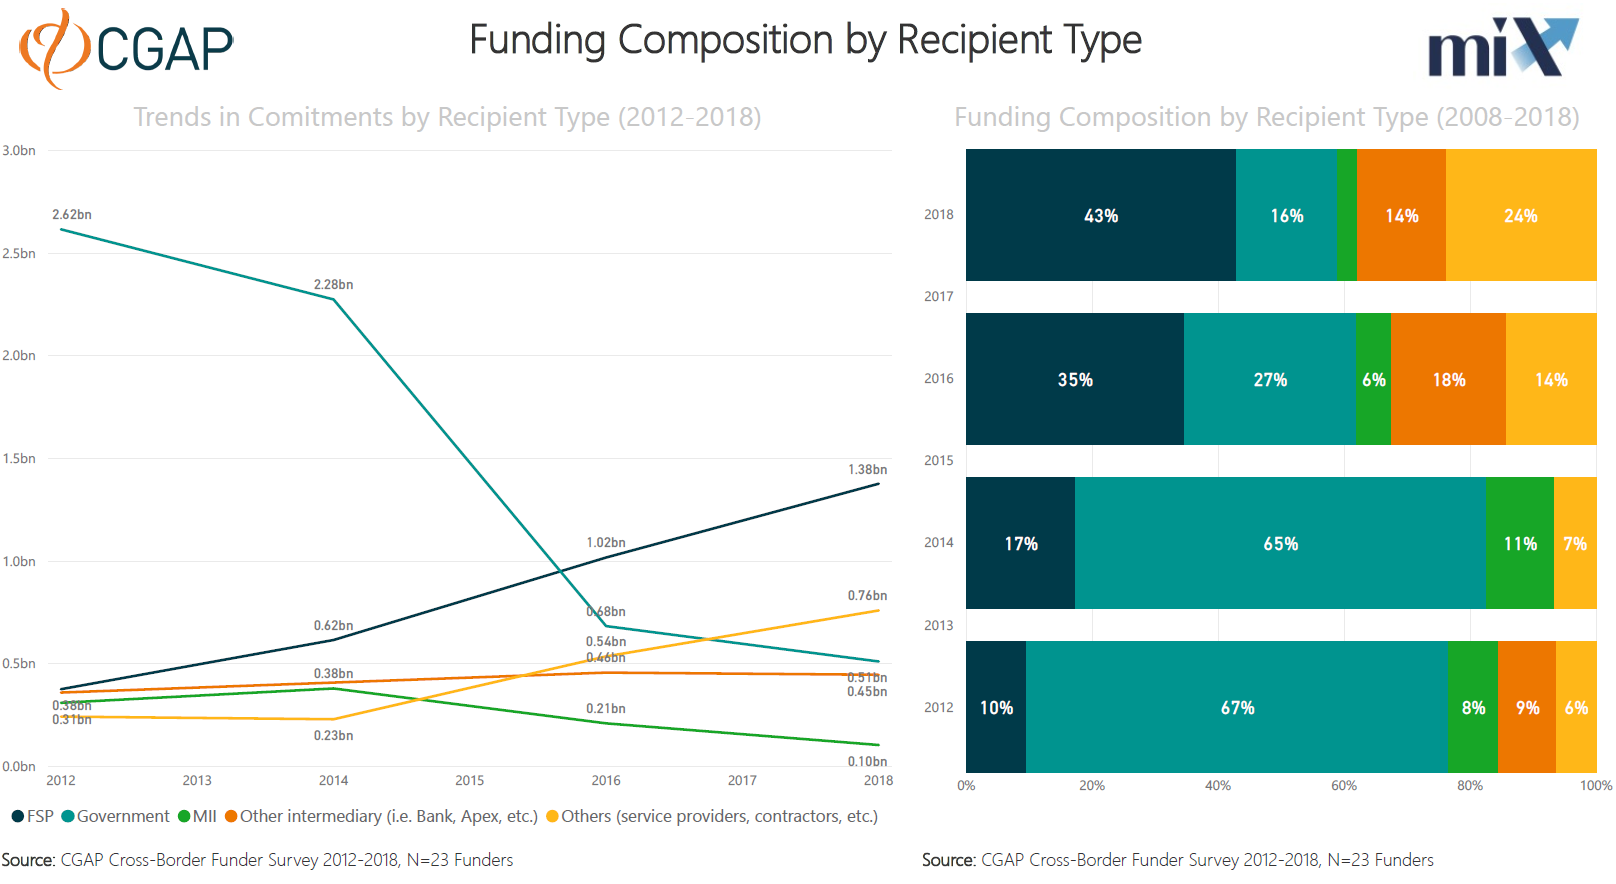 Who do funders fund in South Asia? (Recipients)